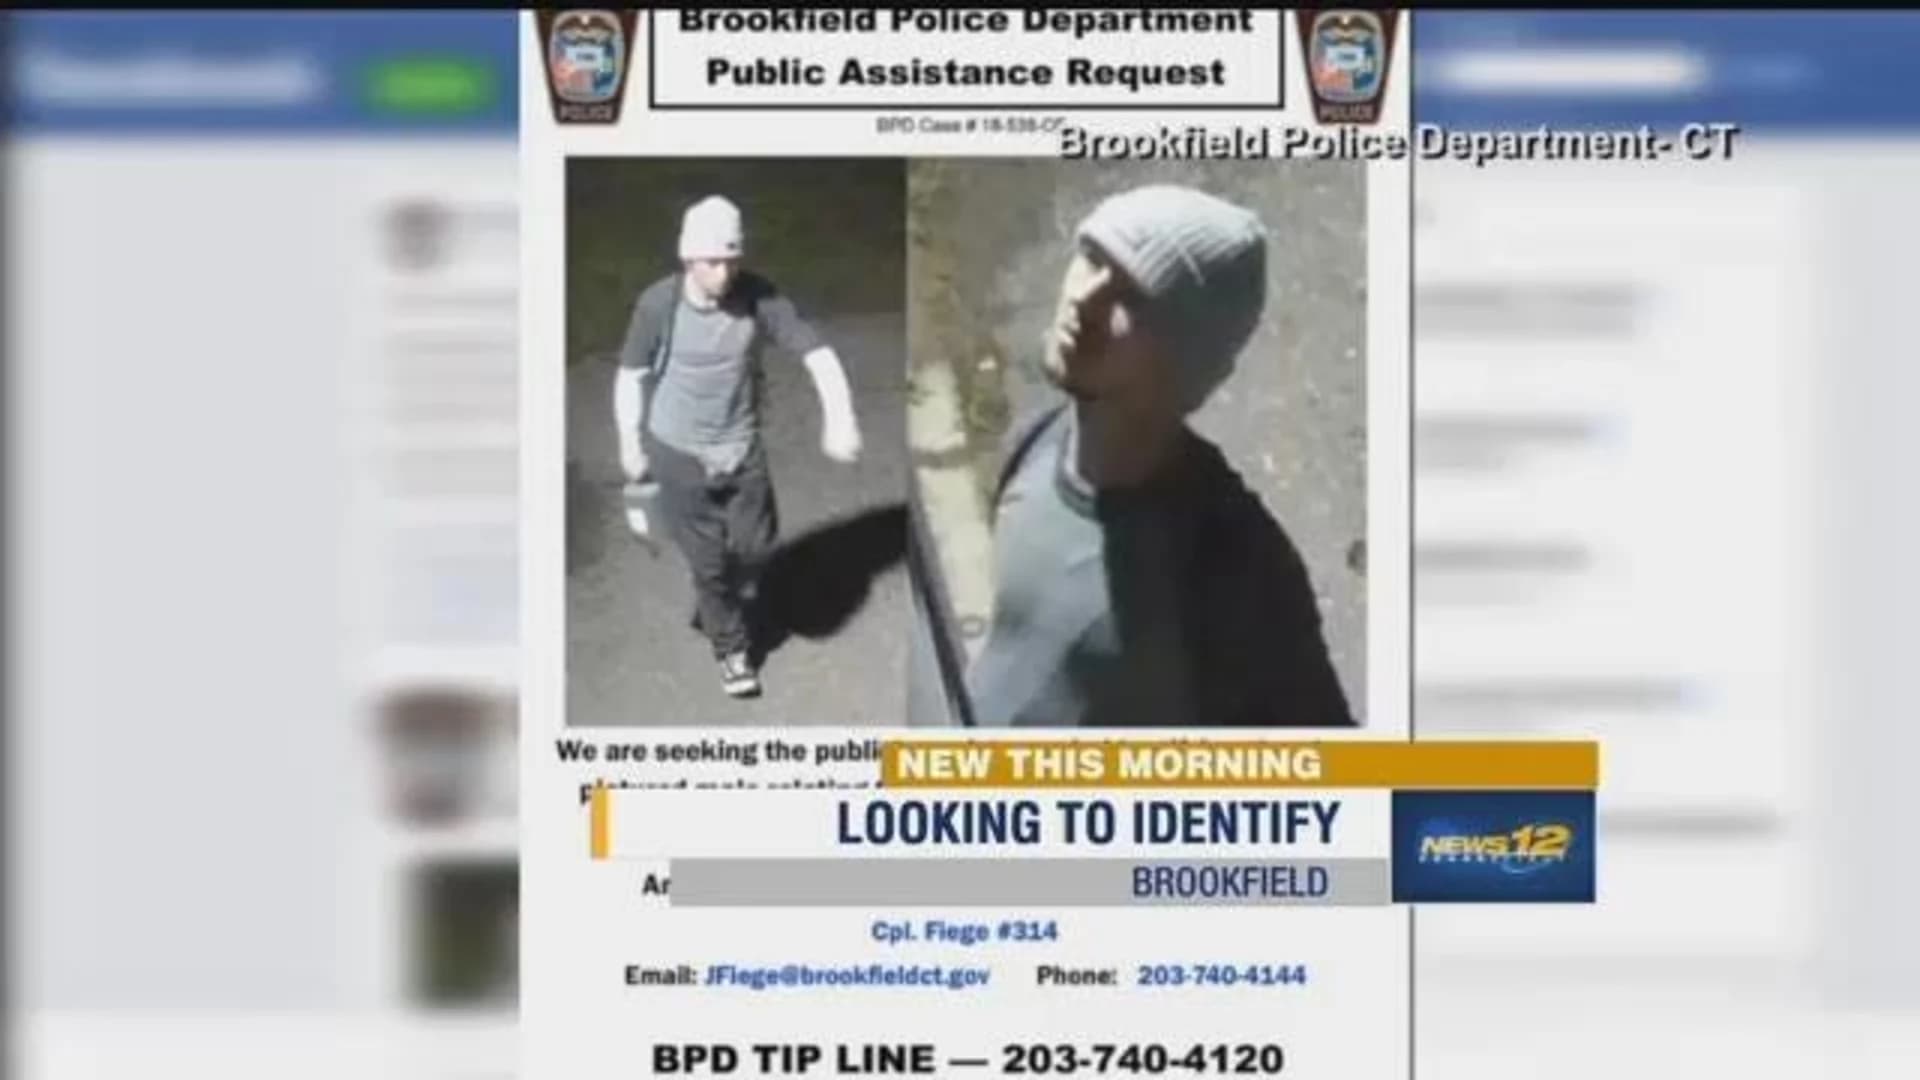 Police ask public for help in identifying man